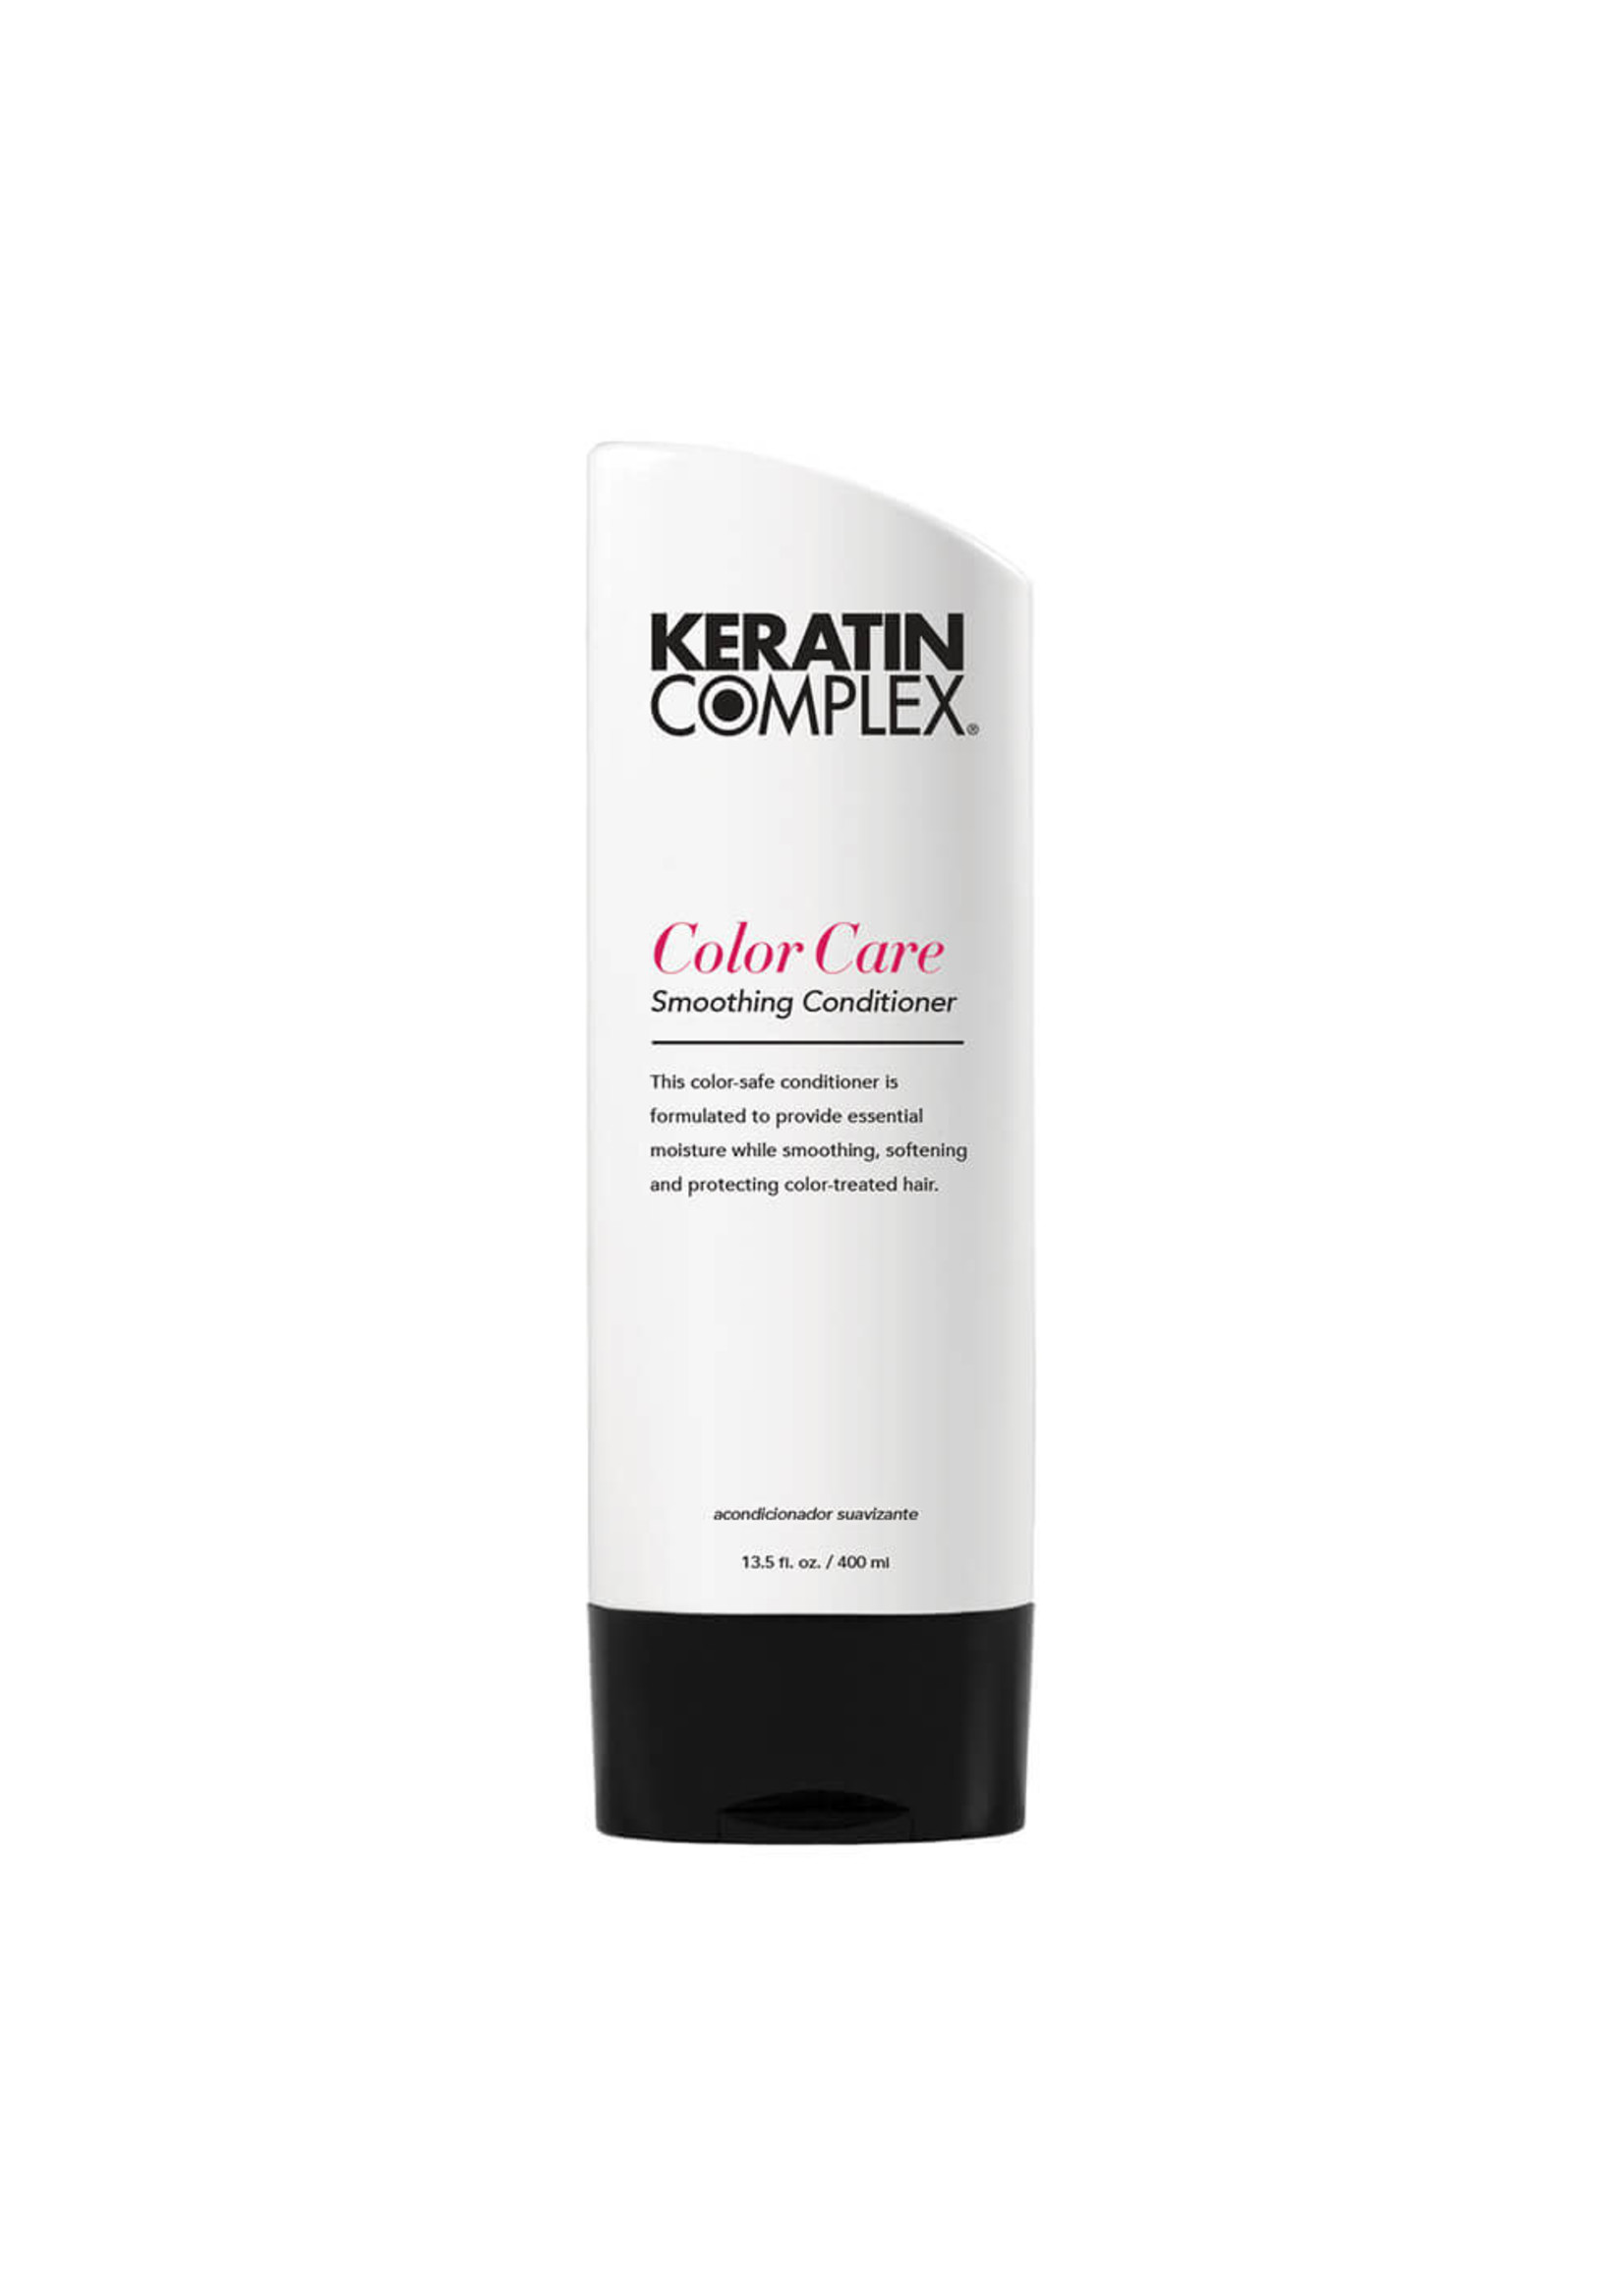 Keratin Complex Keratin Complex Colour Care Smoothing Conditioner 400ml